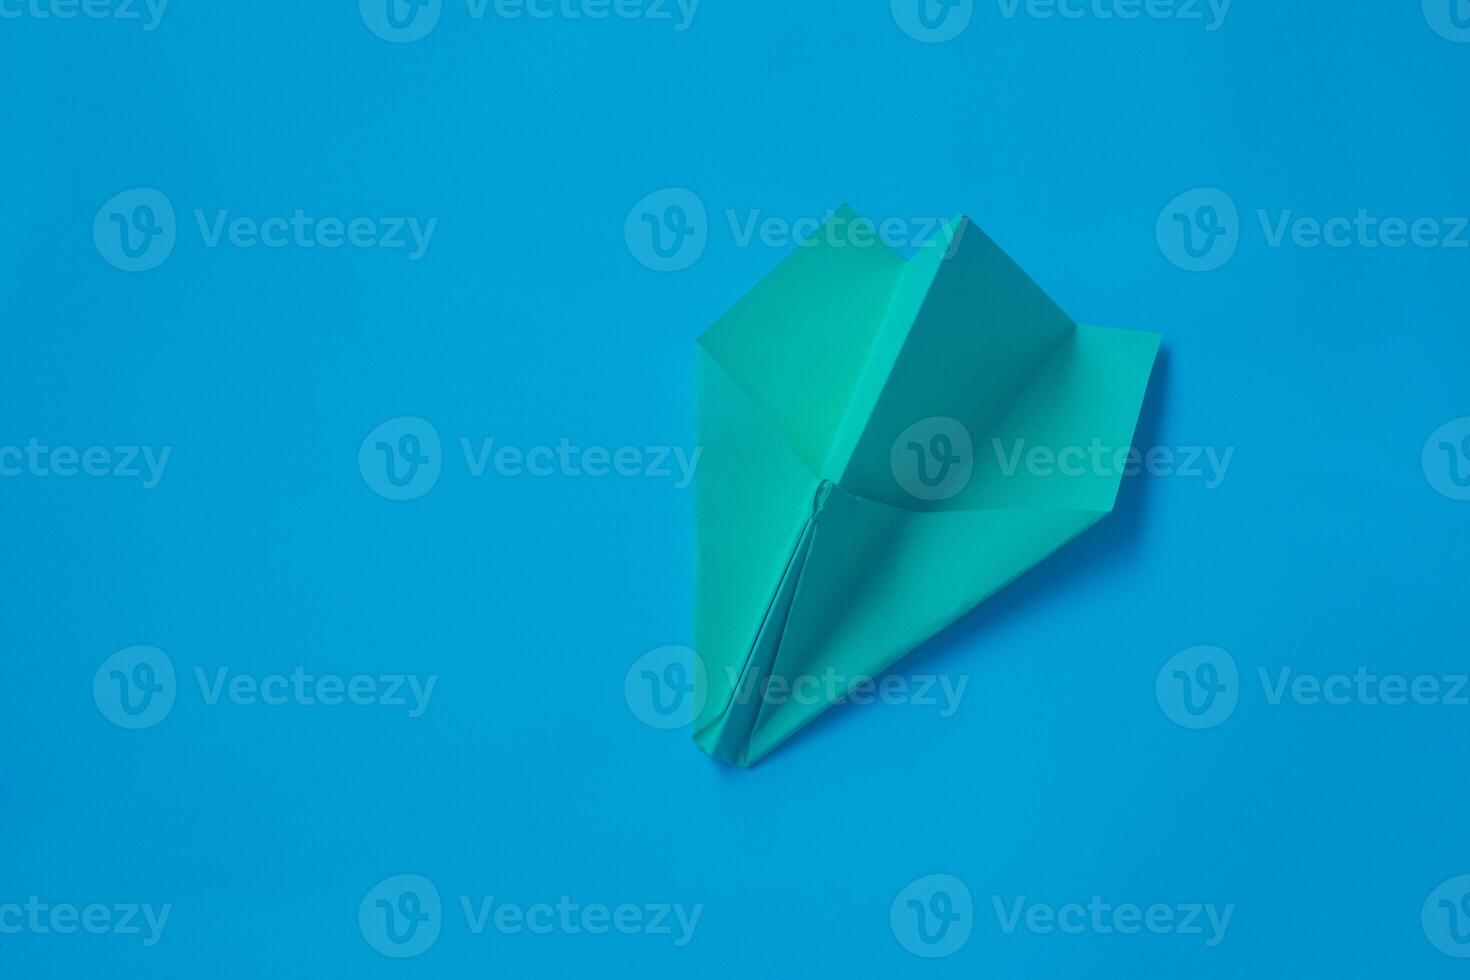 Yellow origami plane on a blue background. photo